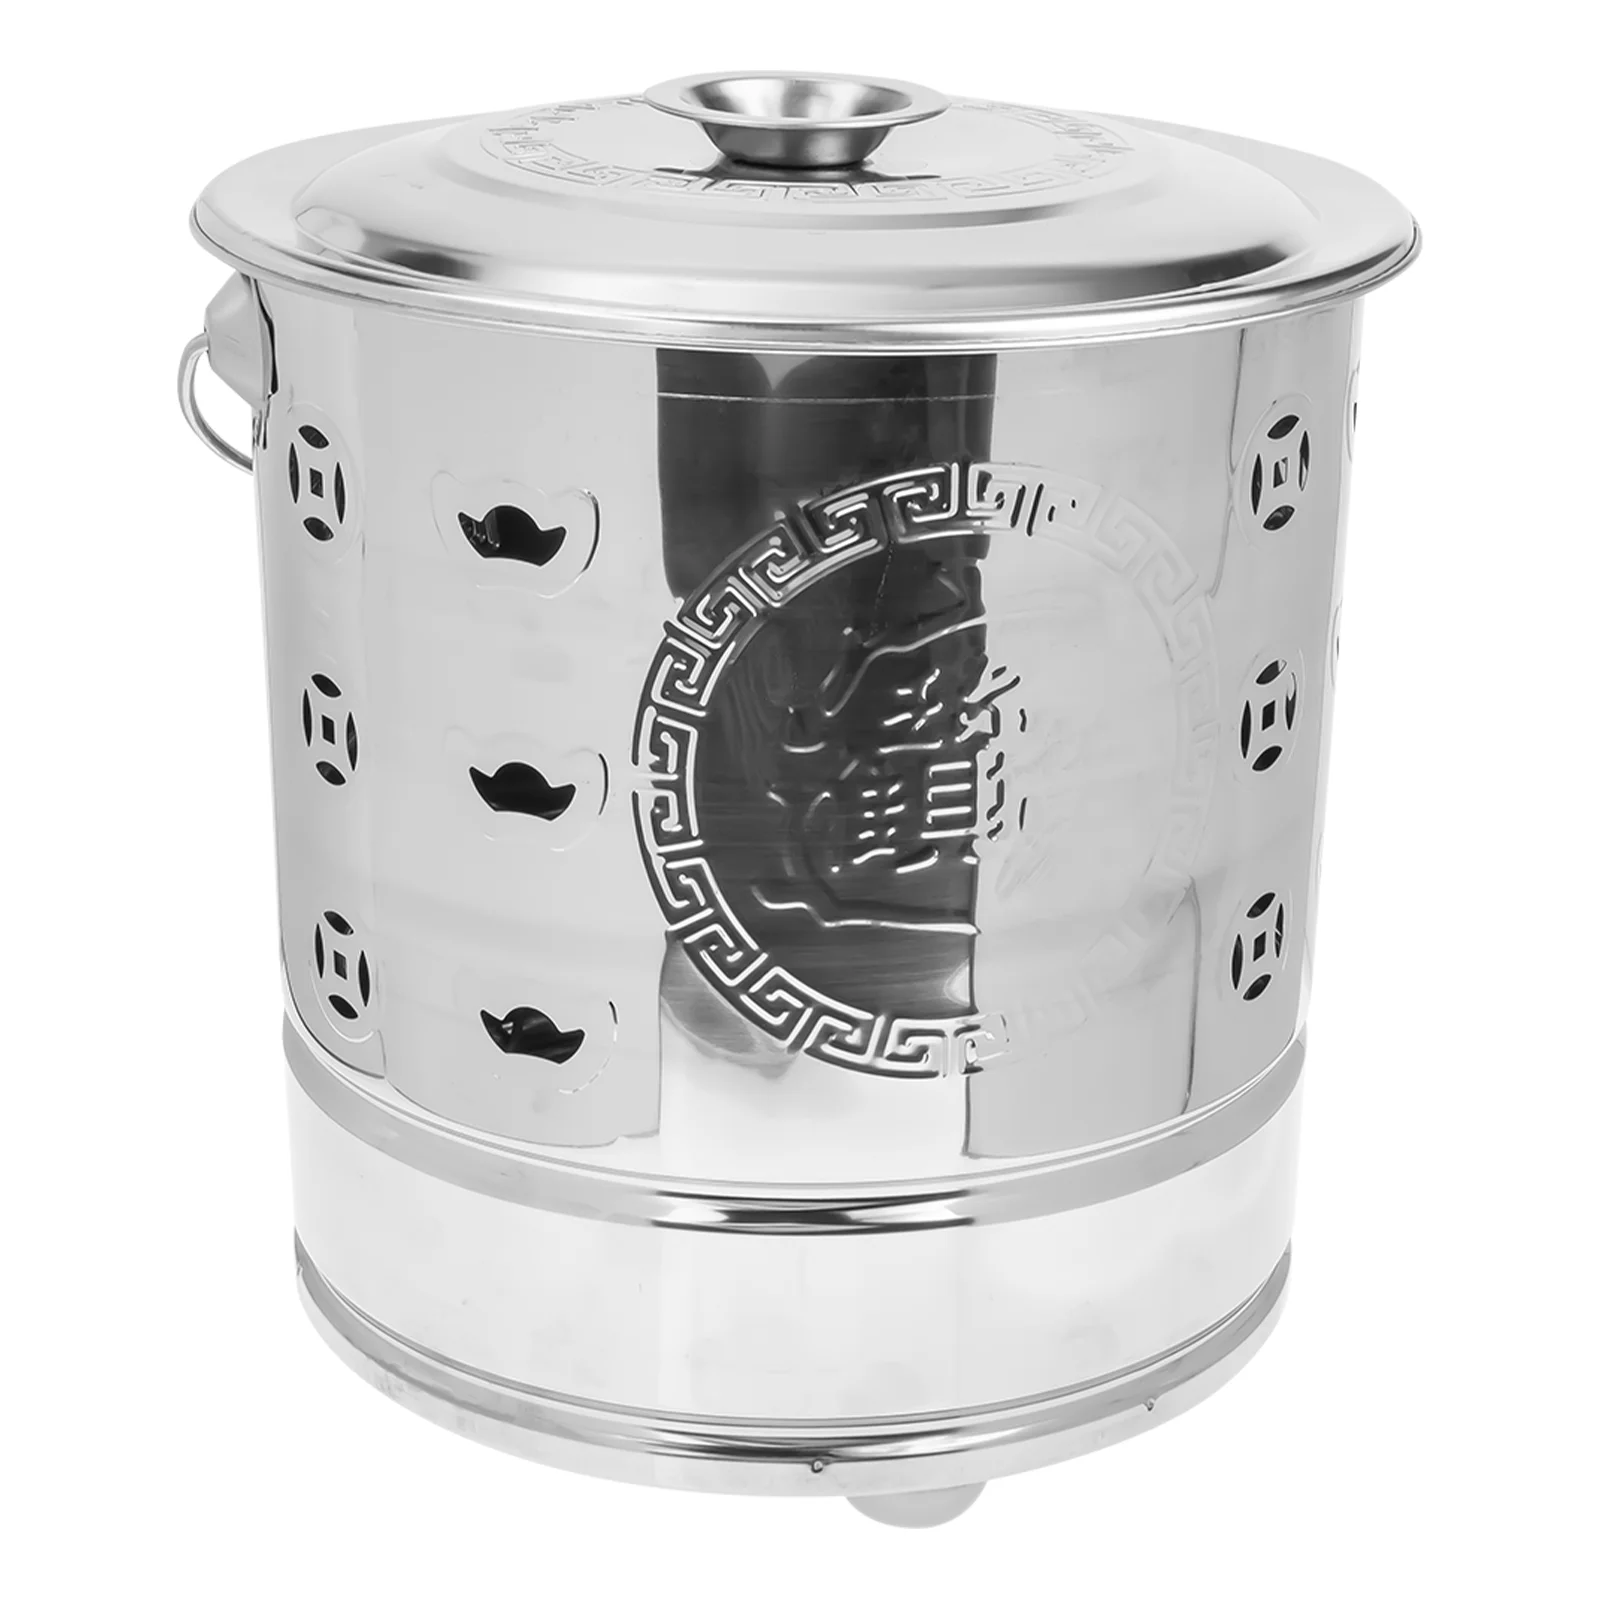 

Fireplace Fire Stainless Steel Portable Cage Galvanized Trash Can for Friends Families